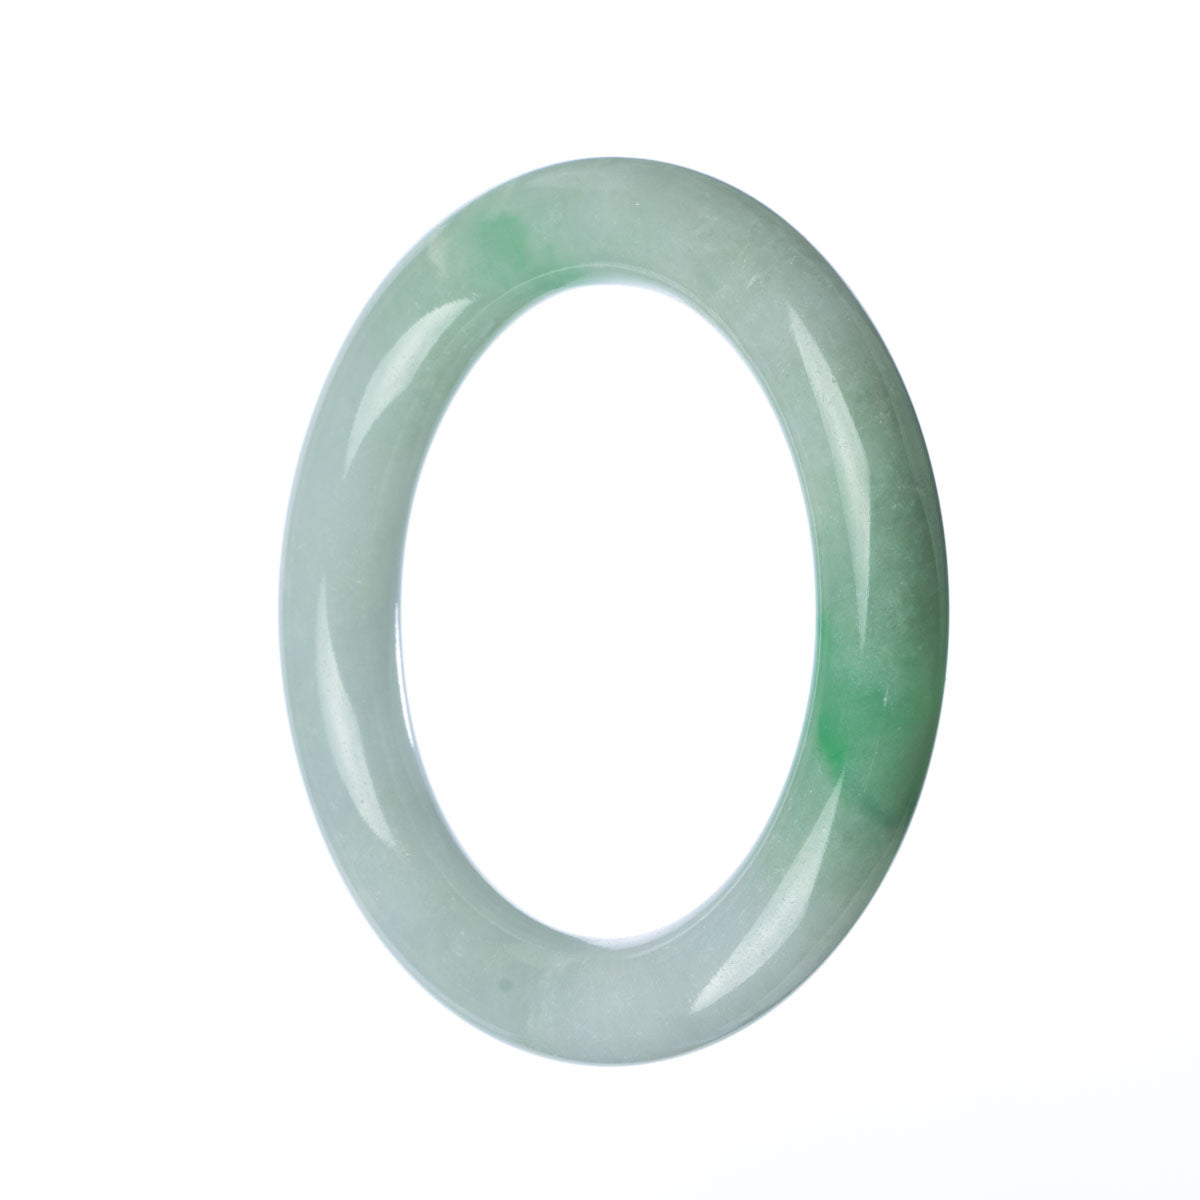 A round, genuine Grade A Green White Jade bangle bracelet with a diameter of 58mm. The bracelet is from the MAYS™ collection.